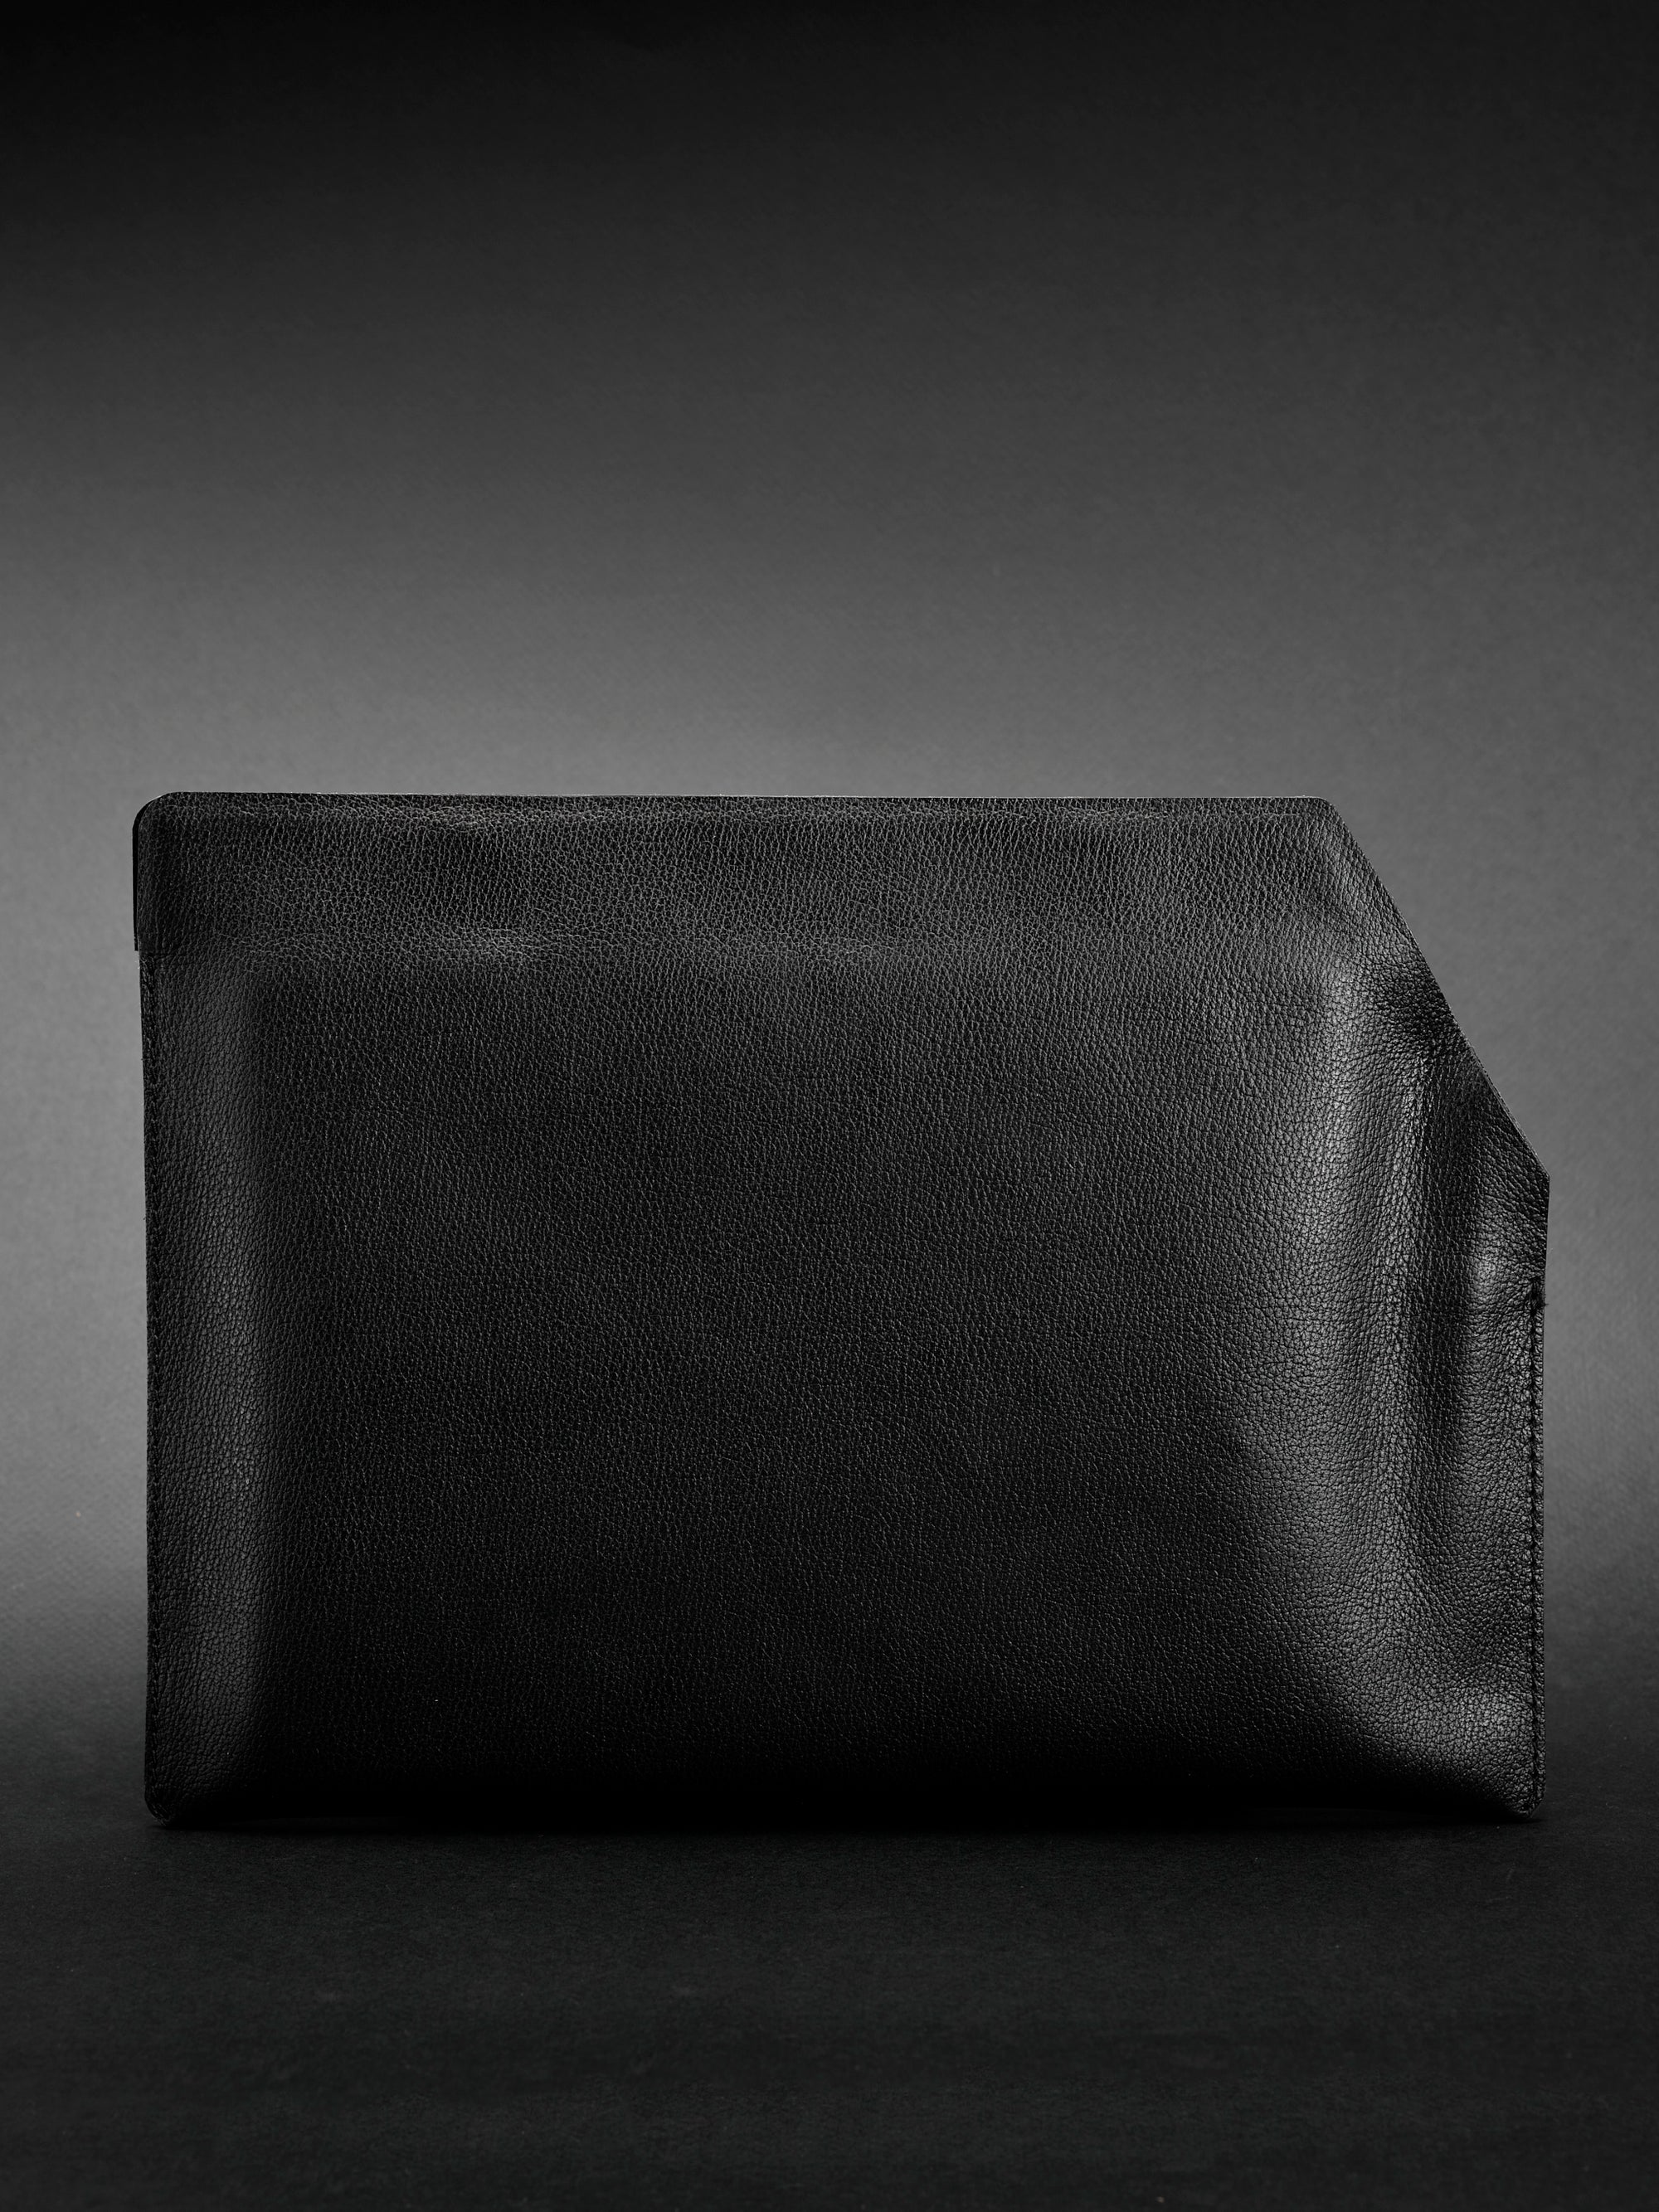 Front view. Draftsman 7 iPad Sleeve Cover Black, iPad Pro 11-inch, iPad Pro 12.9-inch, M1 Chip by Capra Leather